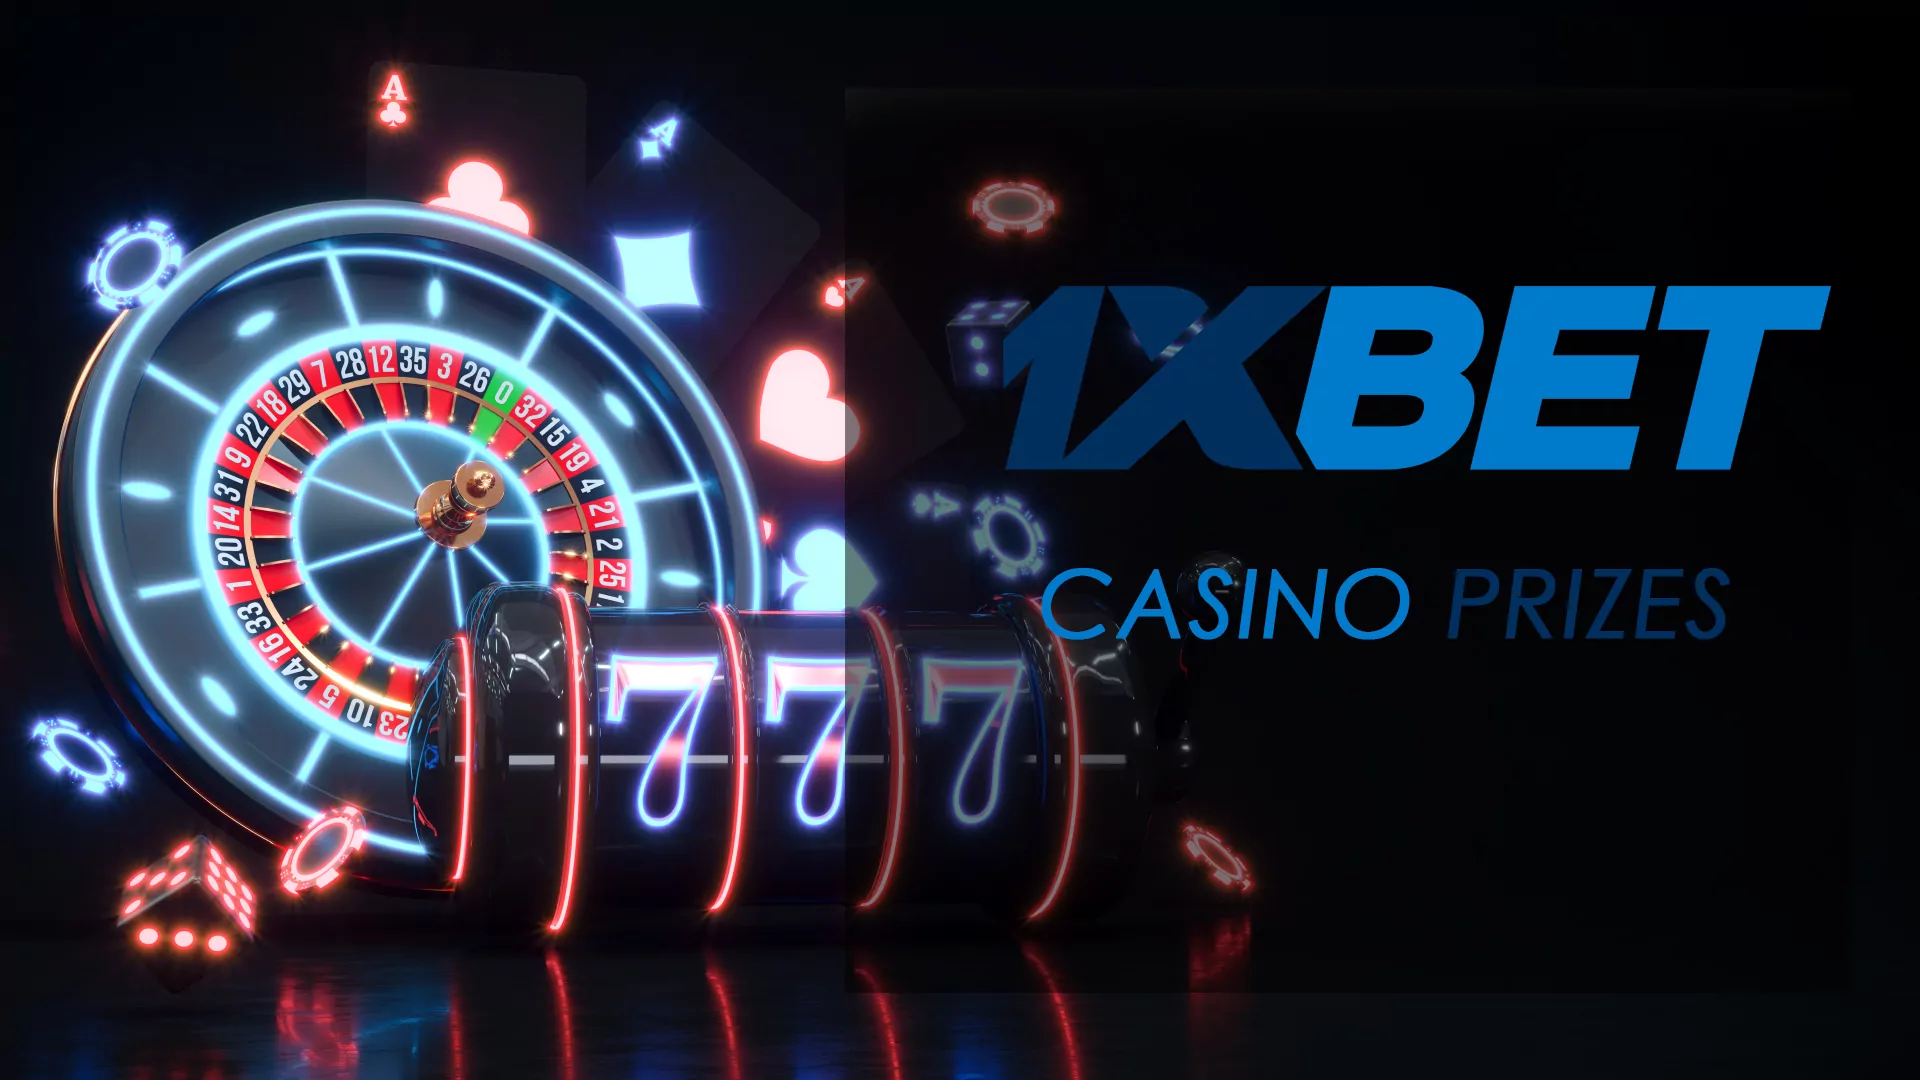 Play online casino to accumulate points and compete for valuable prizes from 1xBet.